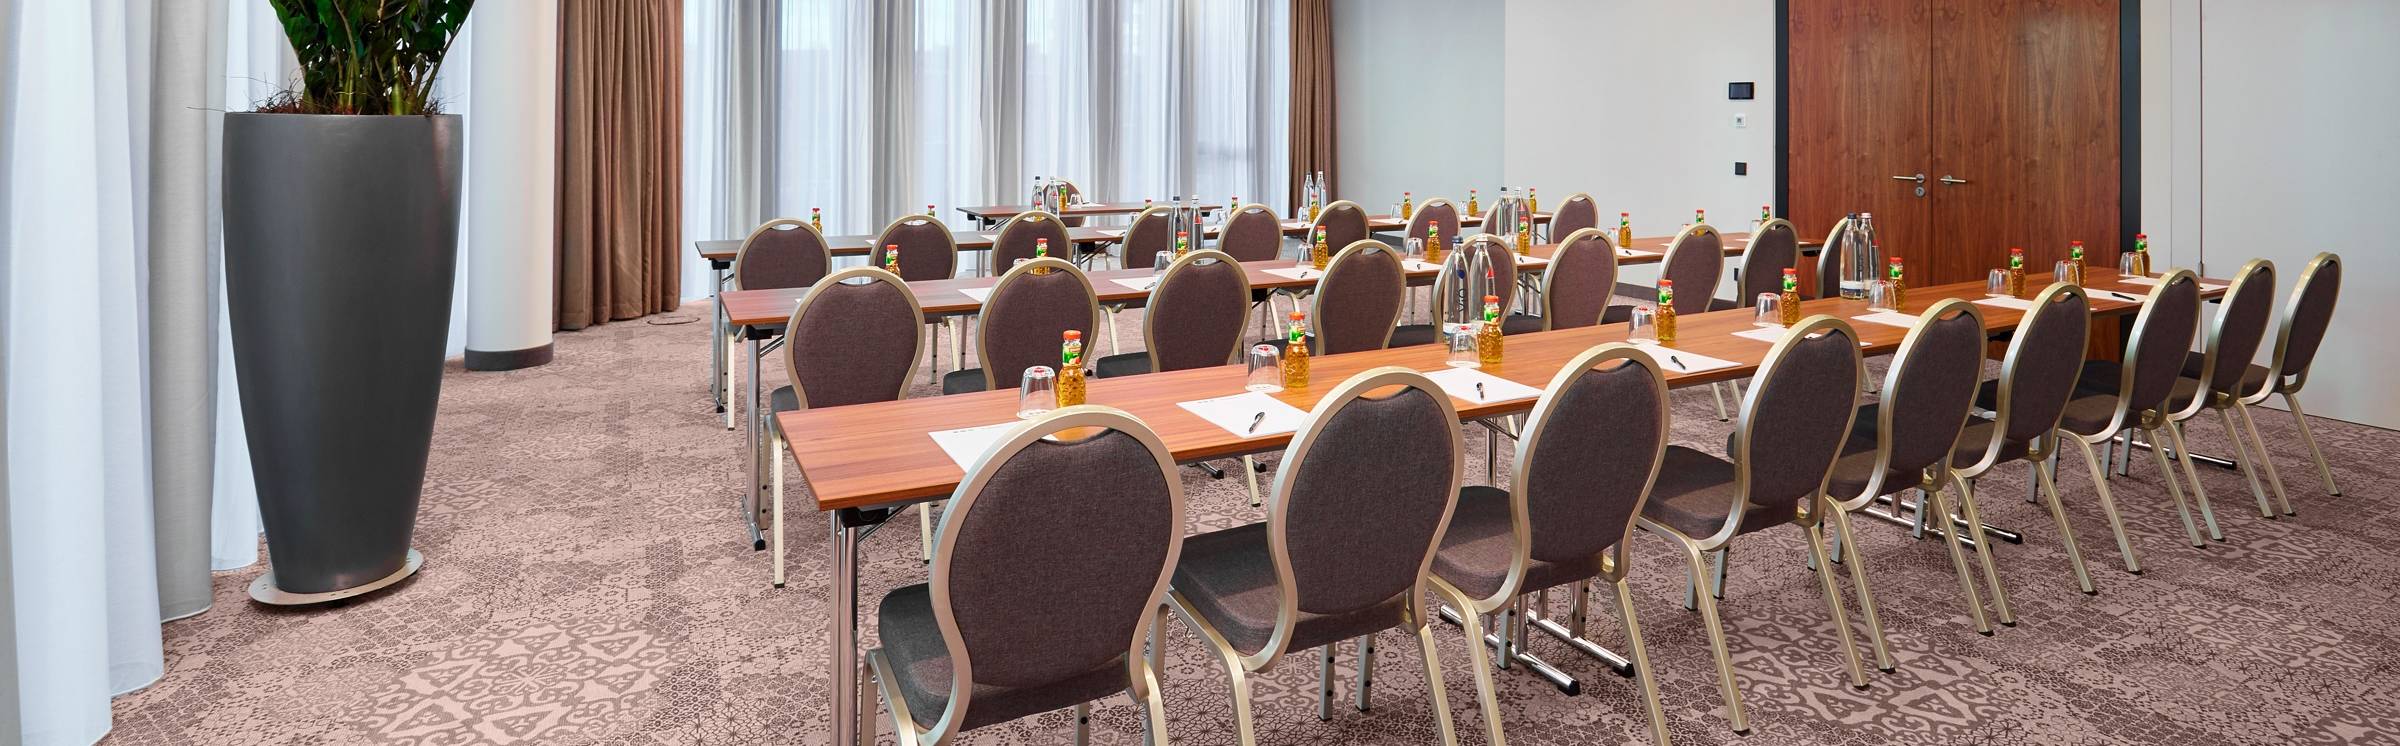 Conferencing package ‘Business’ - meetings at the H-Hotels.com